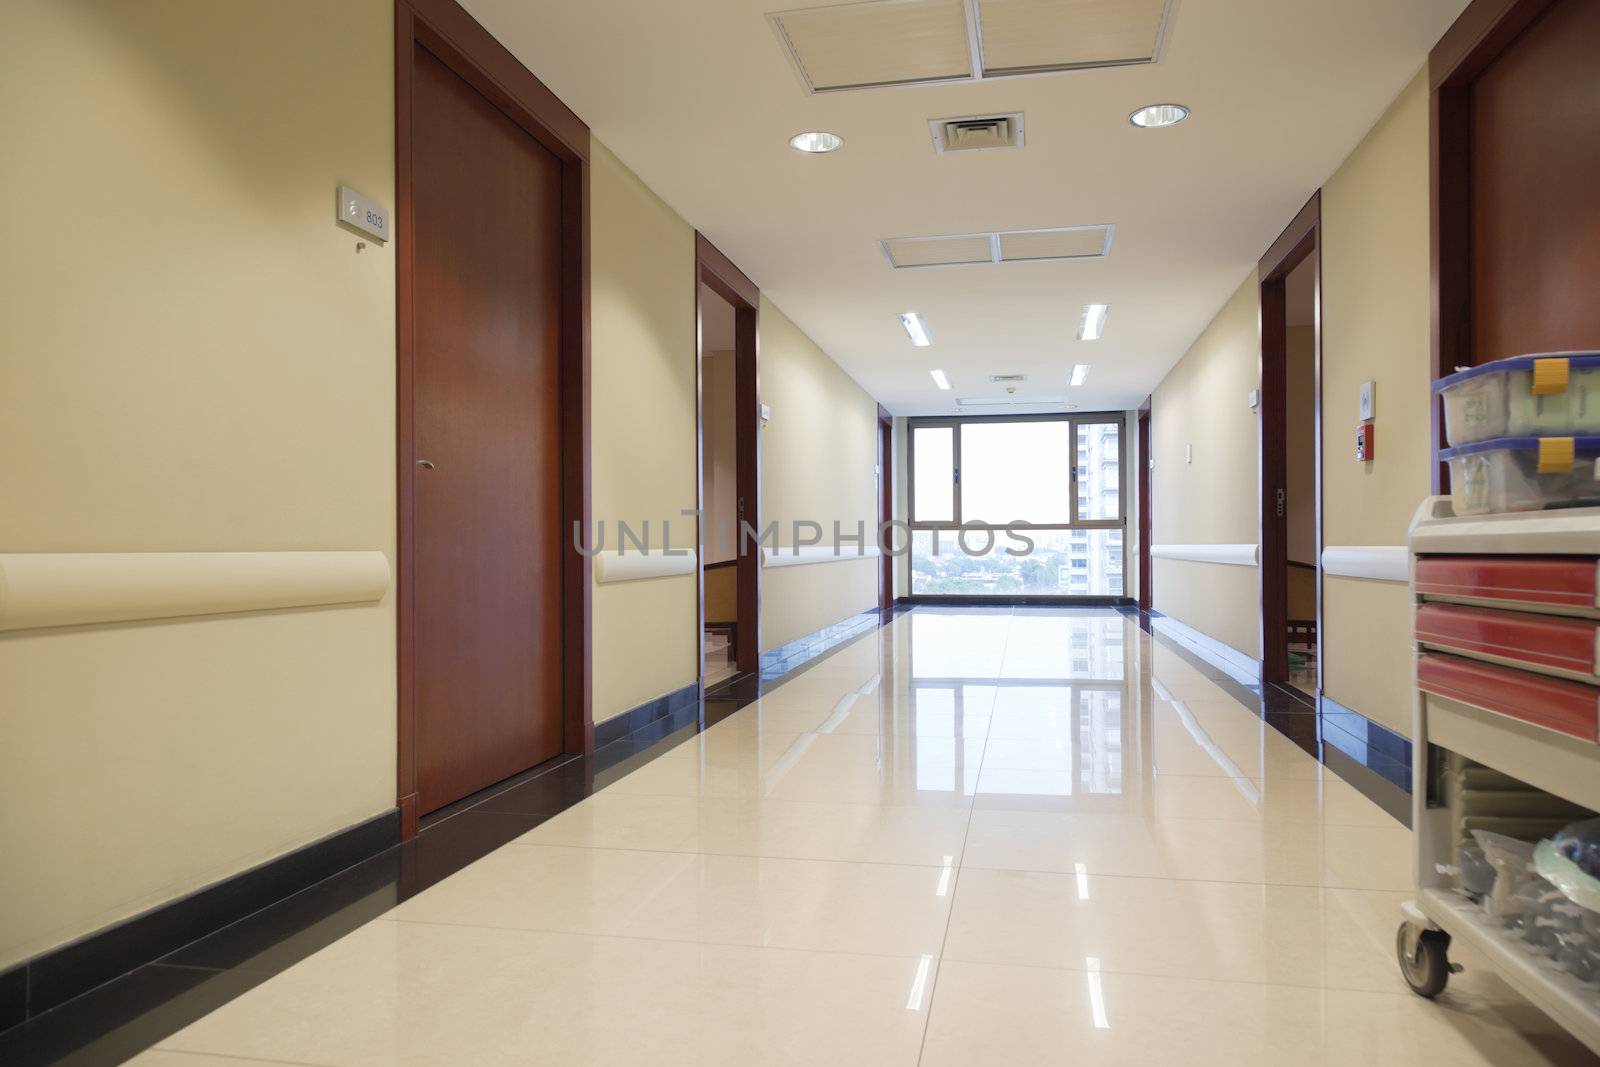 Clean reflective passageway of hospital with window